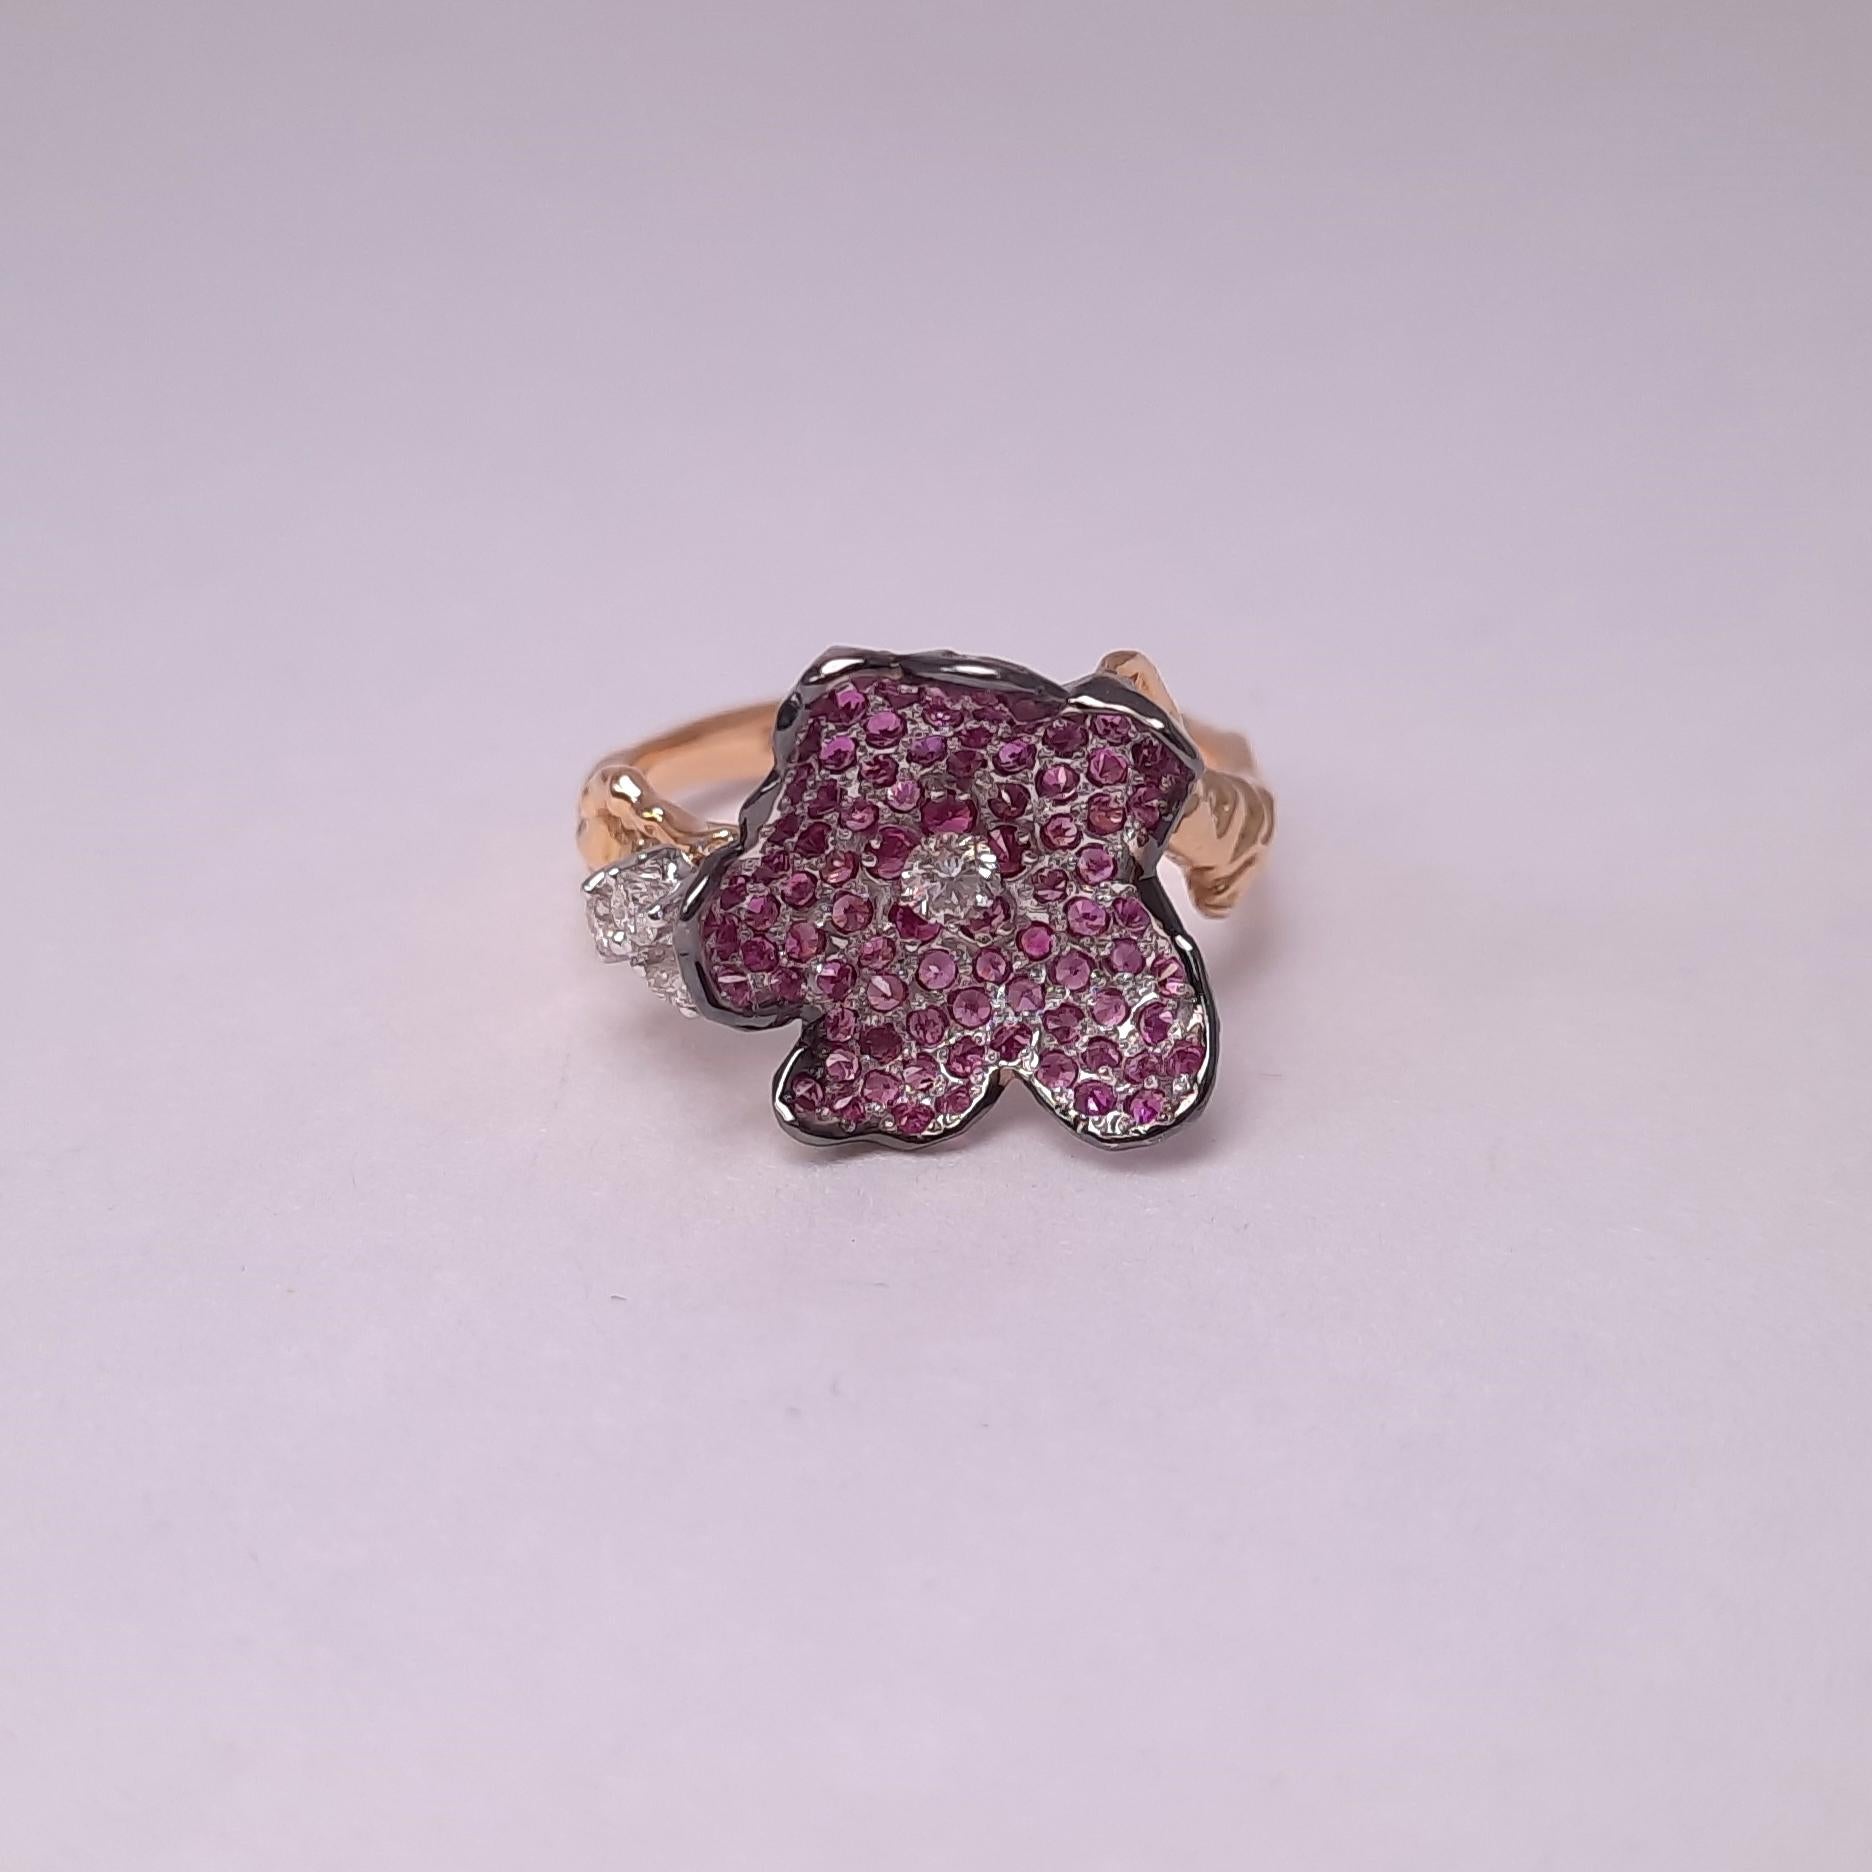 The early flowering almond tree heralds the beginning of spring and new life. Being the symbol of hope, abiding love and friendship, Almond Blossoms Collection by MOISEIKIN is a hymn to the Woman’s Beauty. 

This feminine flower ring consists of